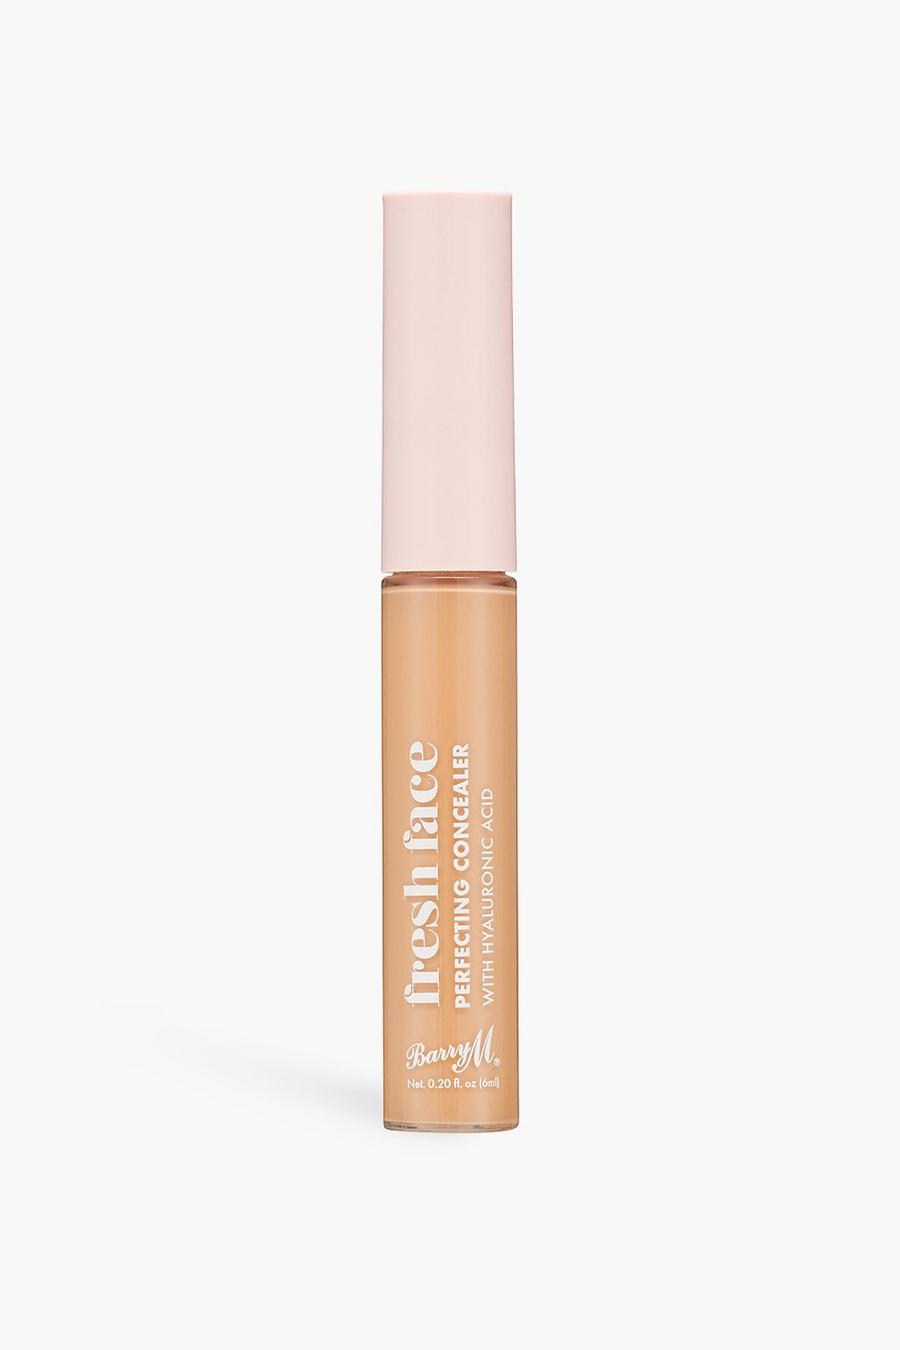 Tan marrone Barry M Fresh Face Perfecting Concealer 7